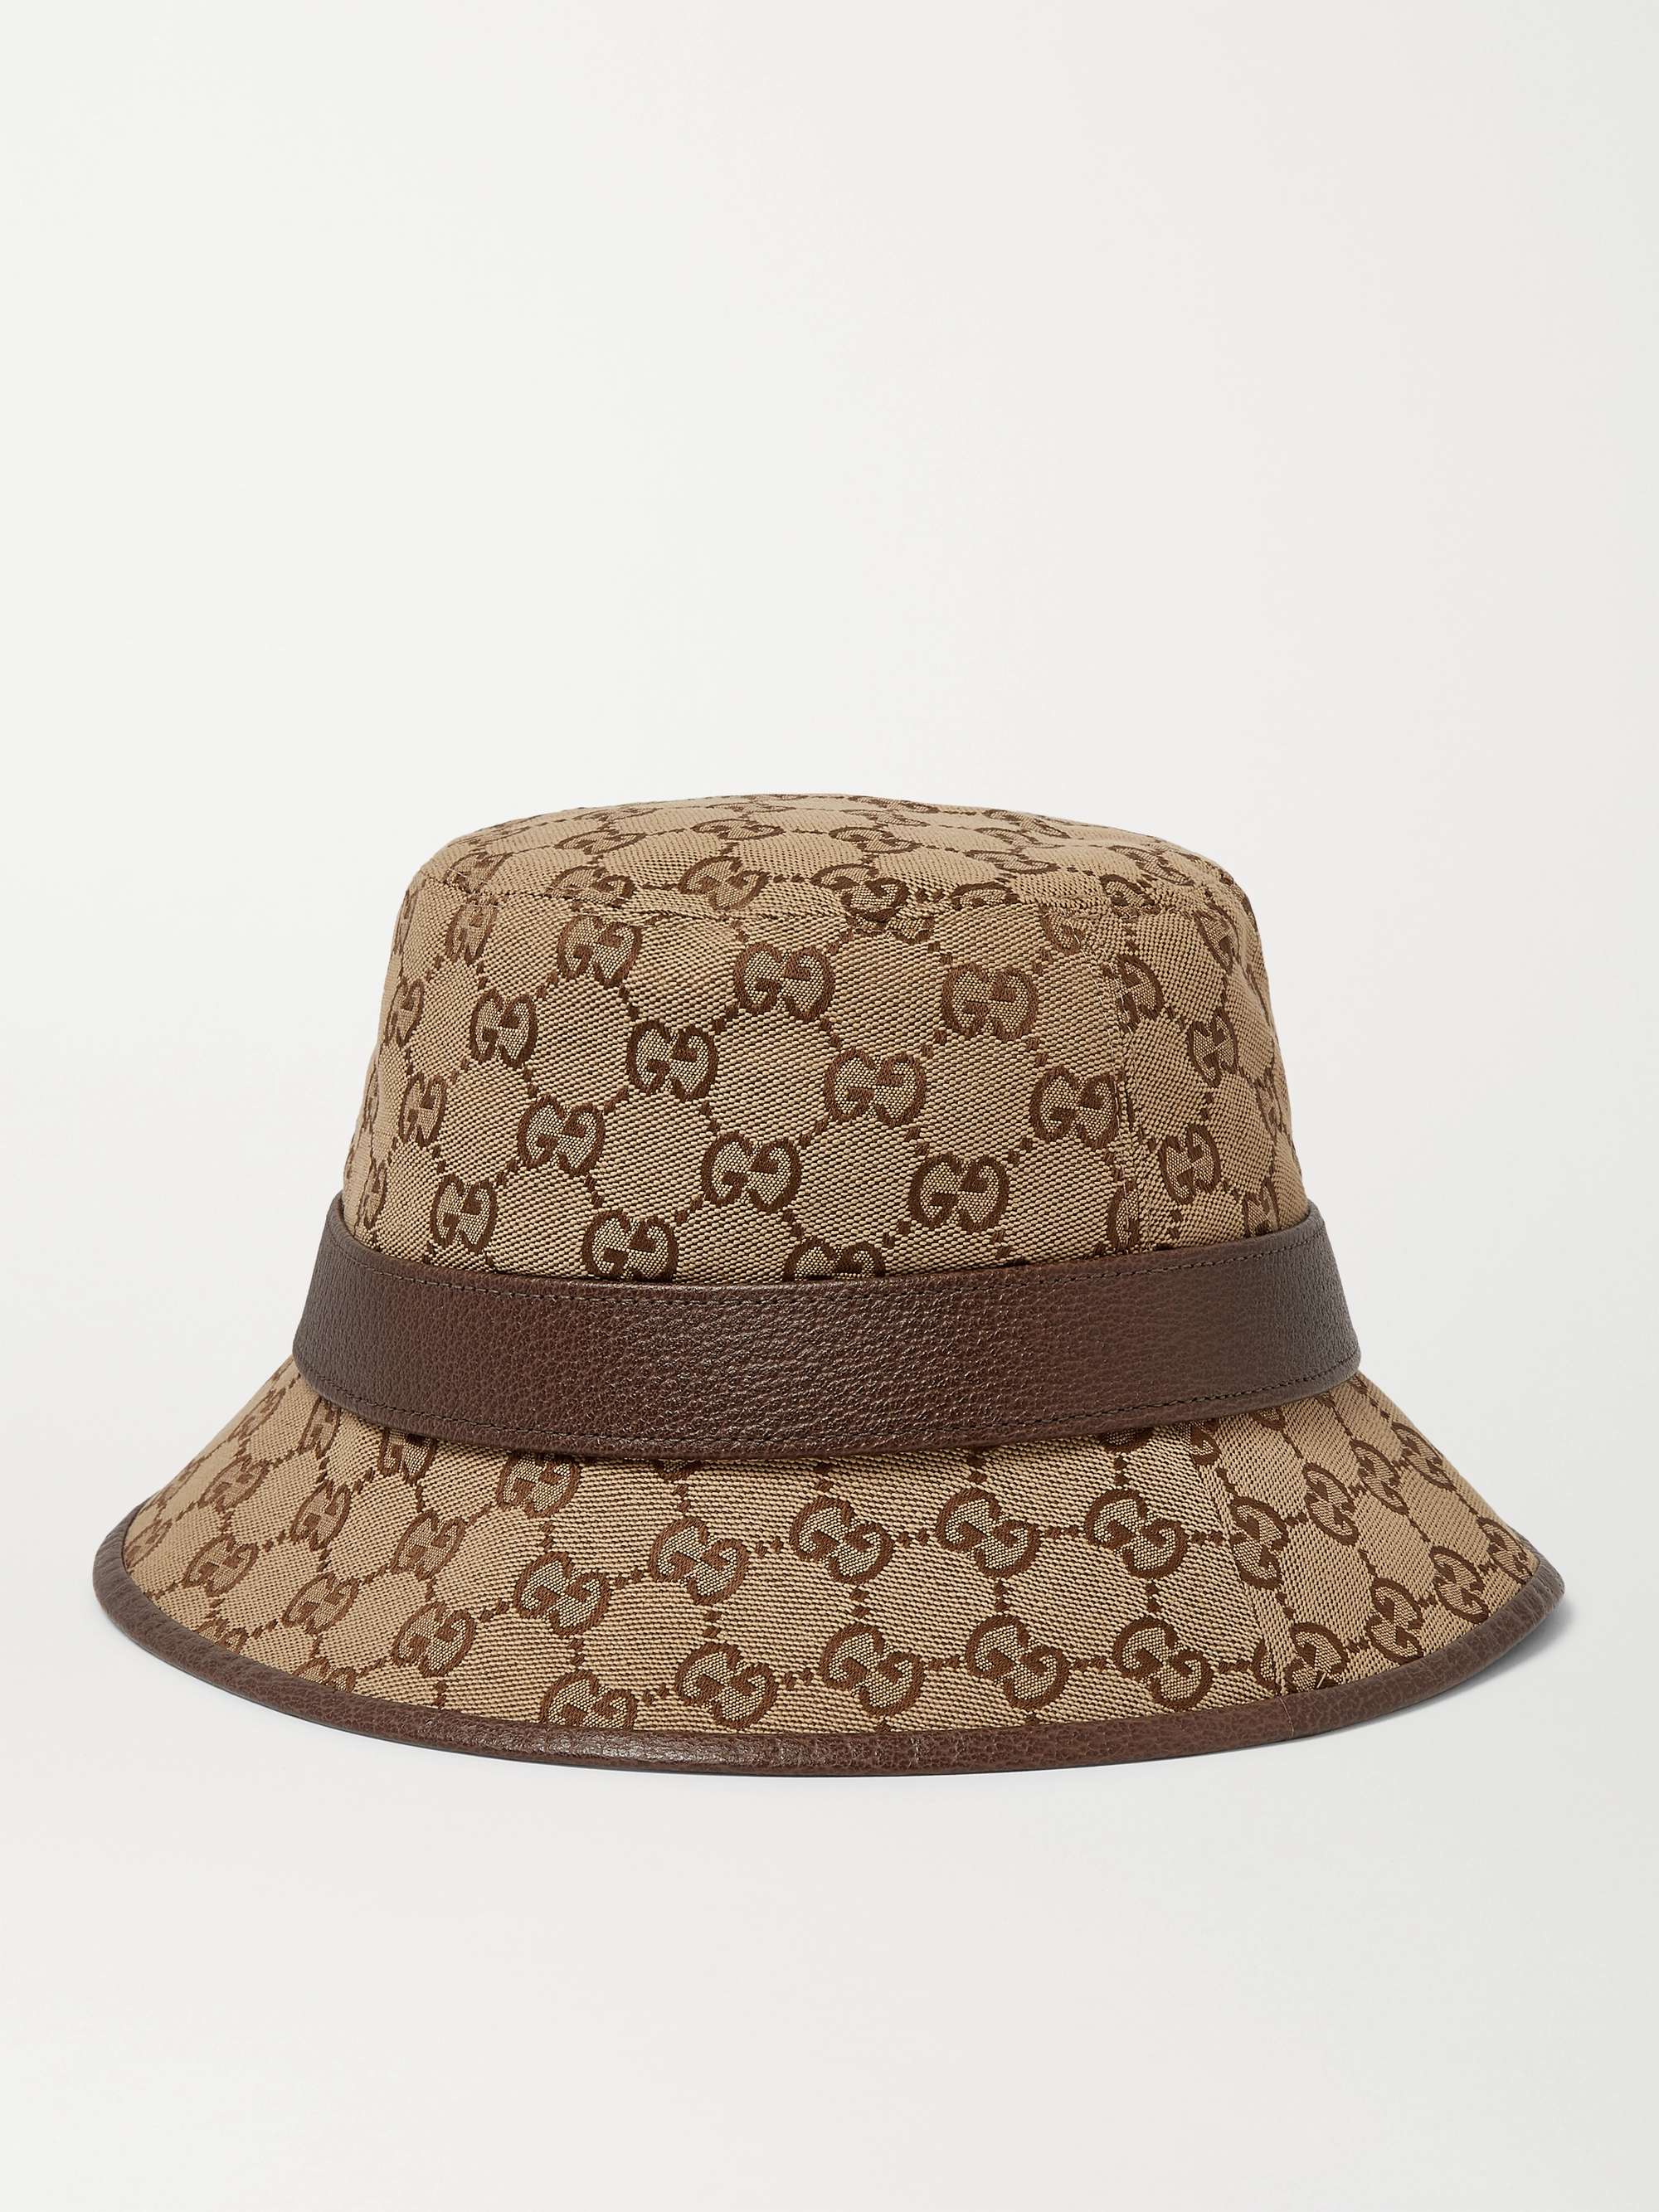 GUCCI Leather-Trimmed Monogrammed Canvas Bucket Hat